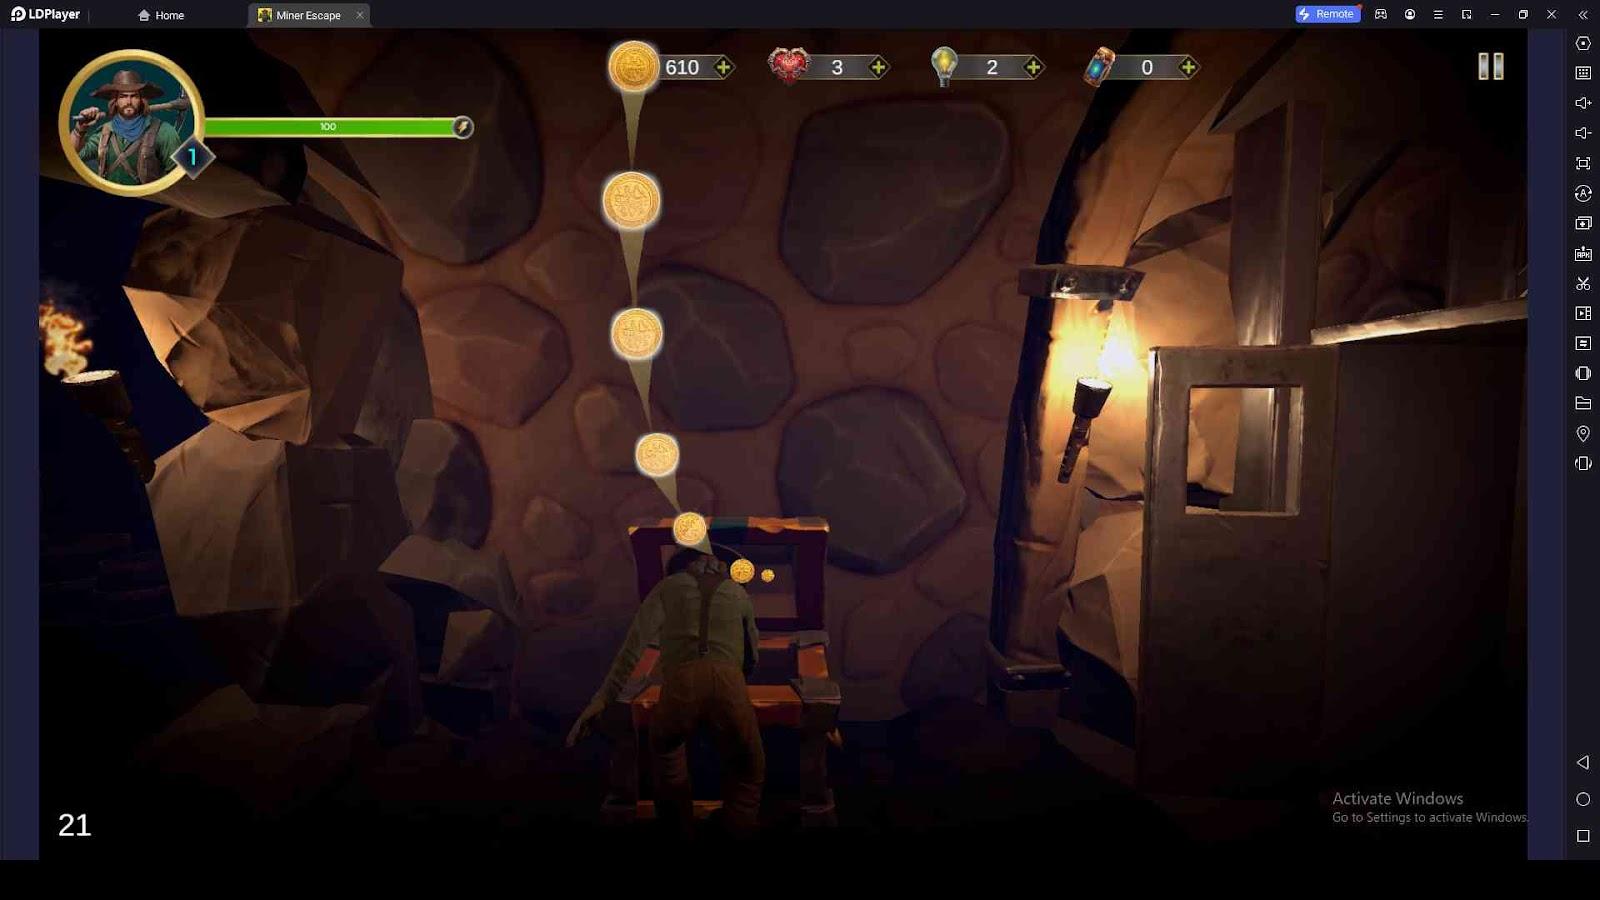 How to Earn Coins in Miner Escape: Puzzle Adventure